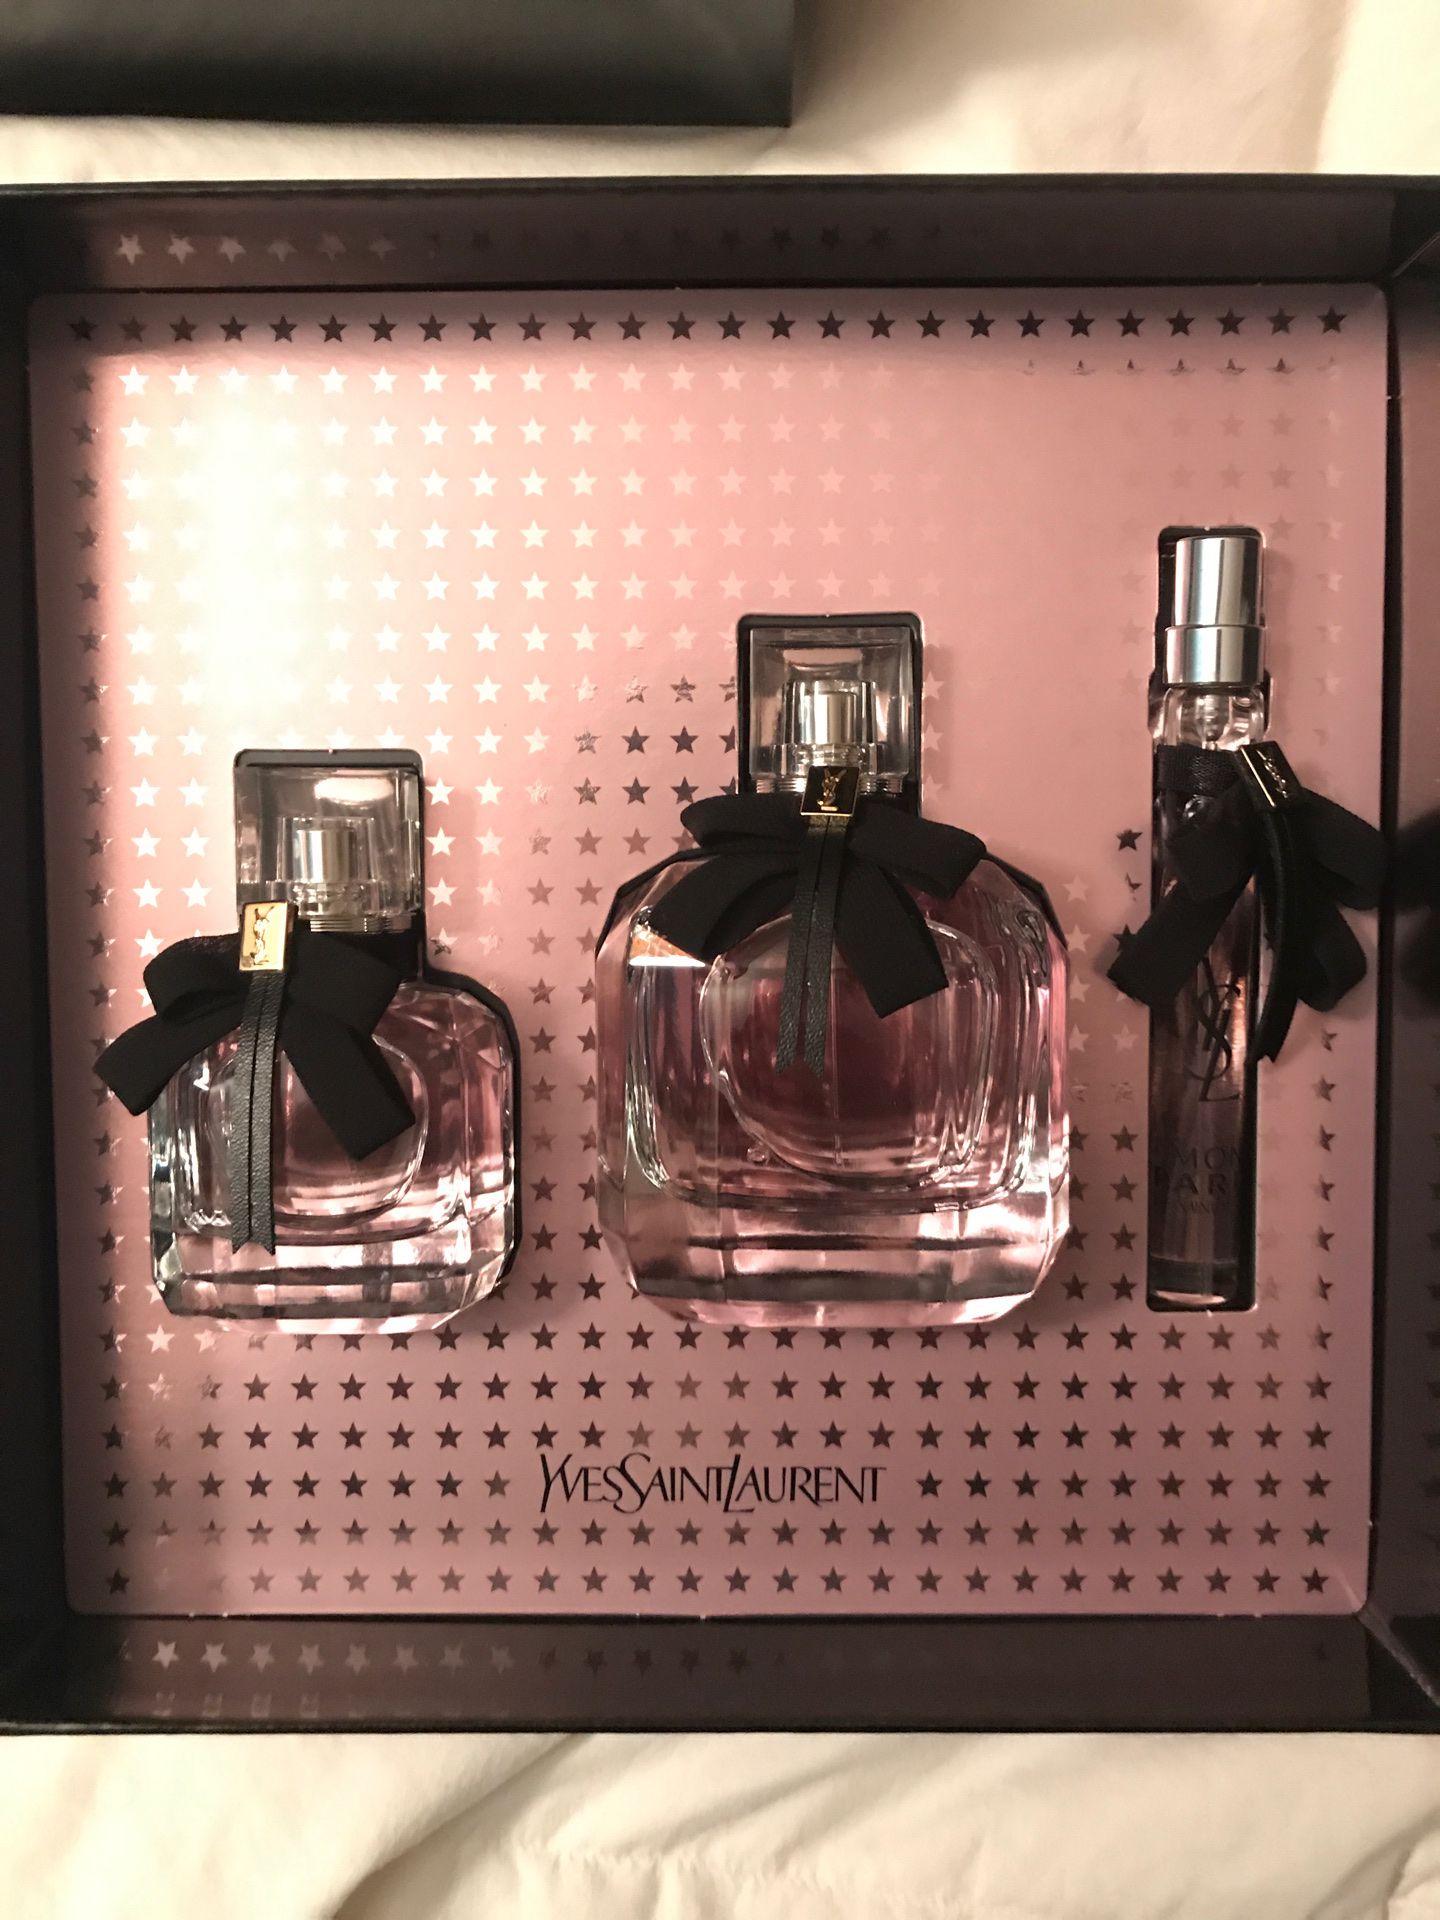 Brand new perfume sets 80 each please only serious inquires